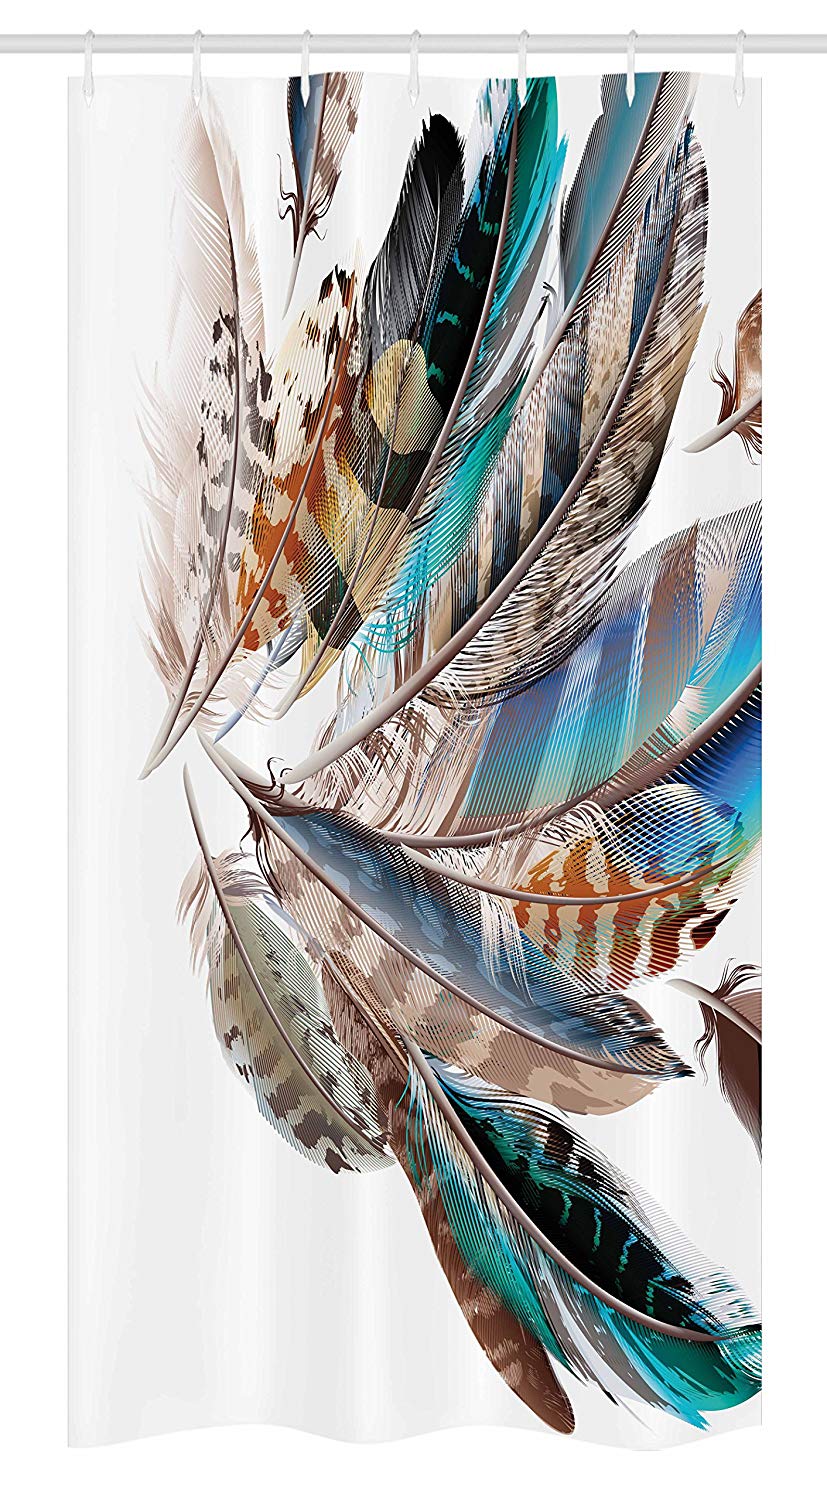 Ambesonne Feathers Stall Shower Curtain, Vaned Types and Natal Contour Flight Bird Feathers and Animal Skin Element Print, Fabric Bathroom Decor Set with Hooks, 36